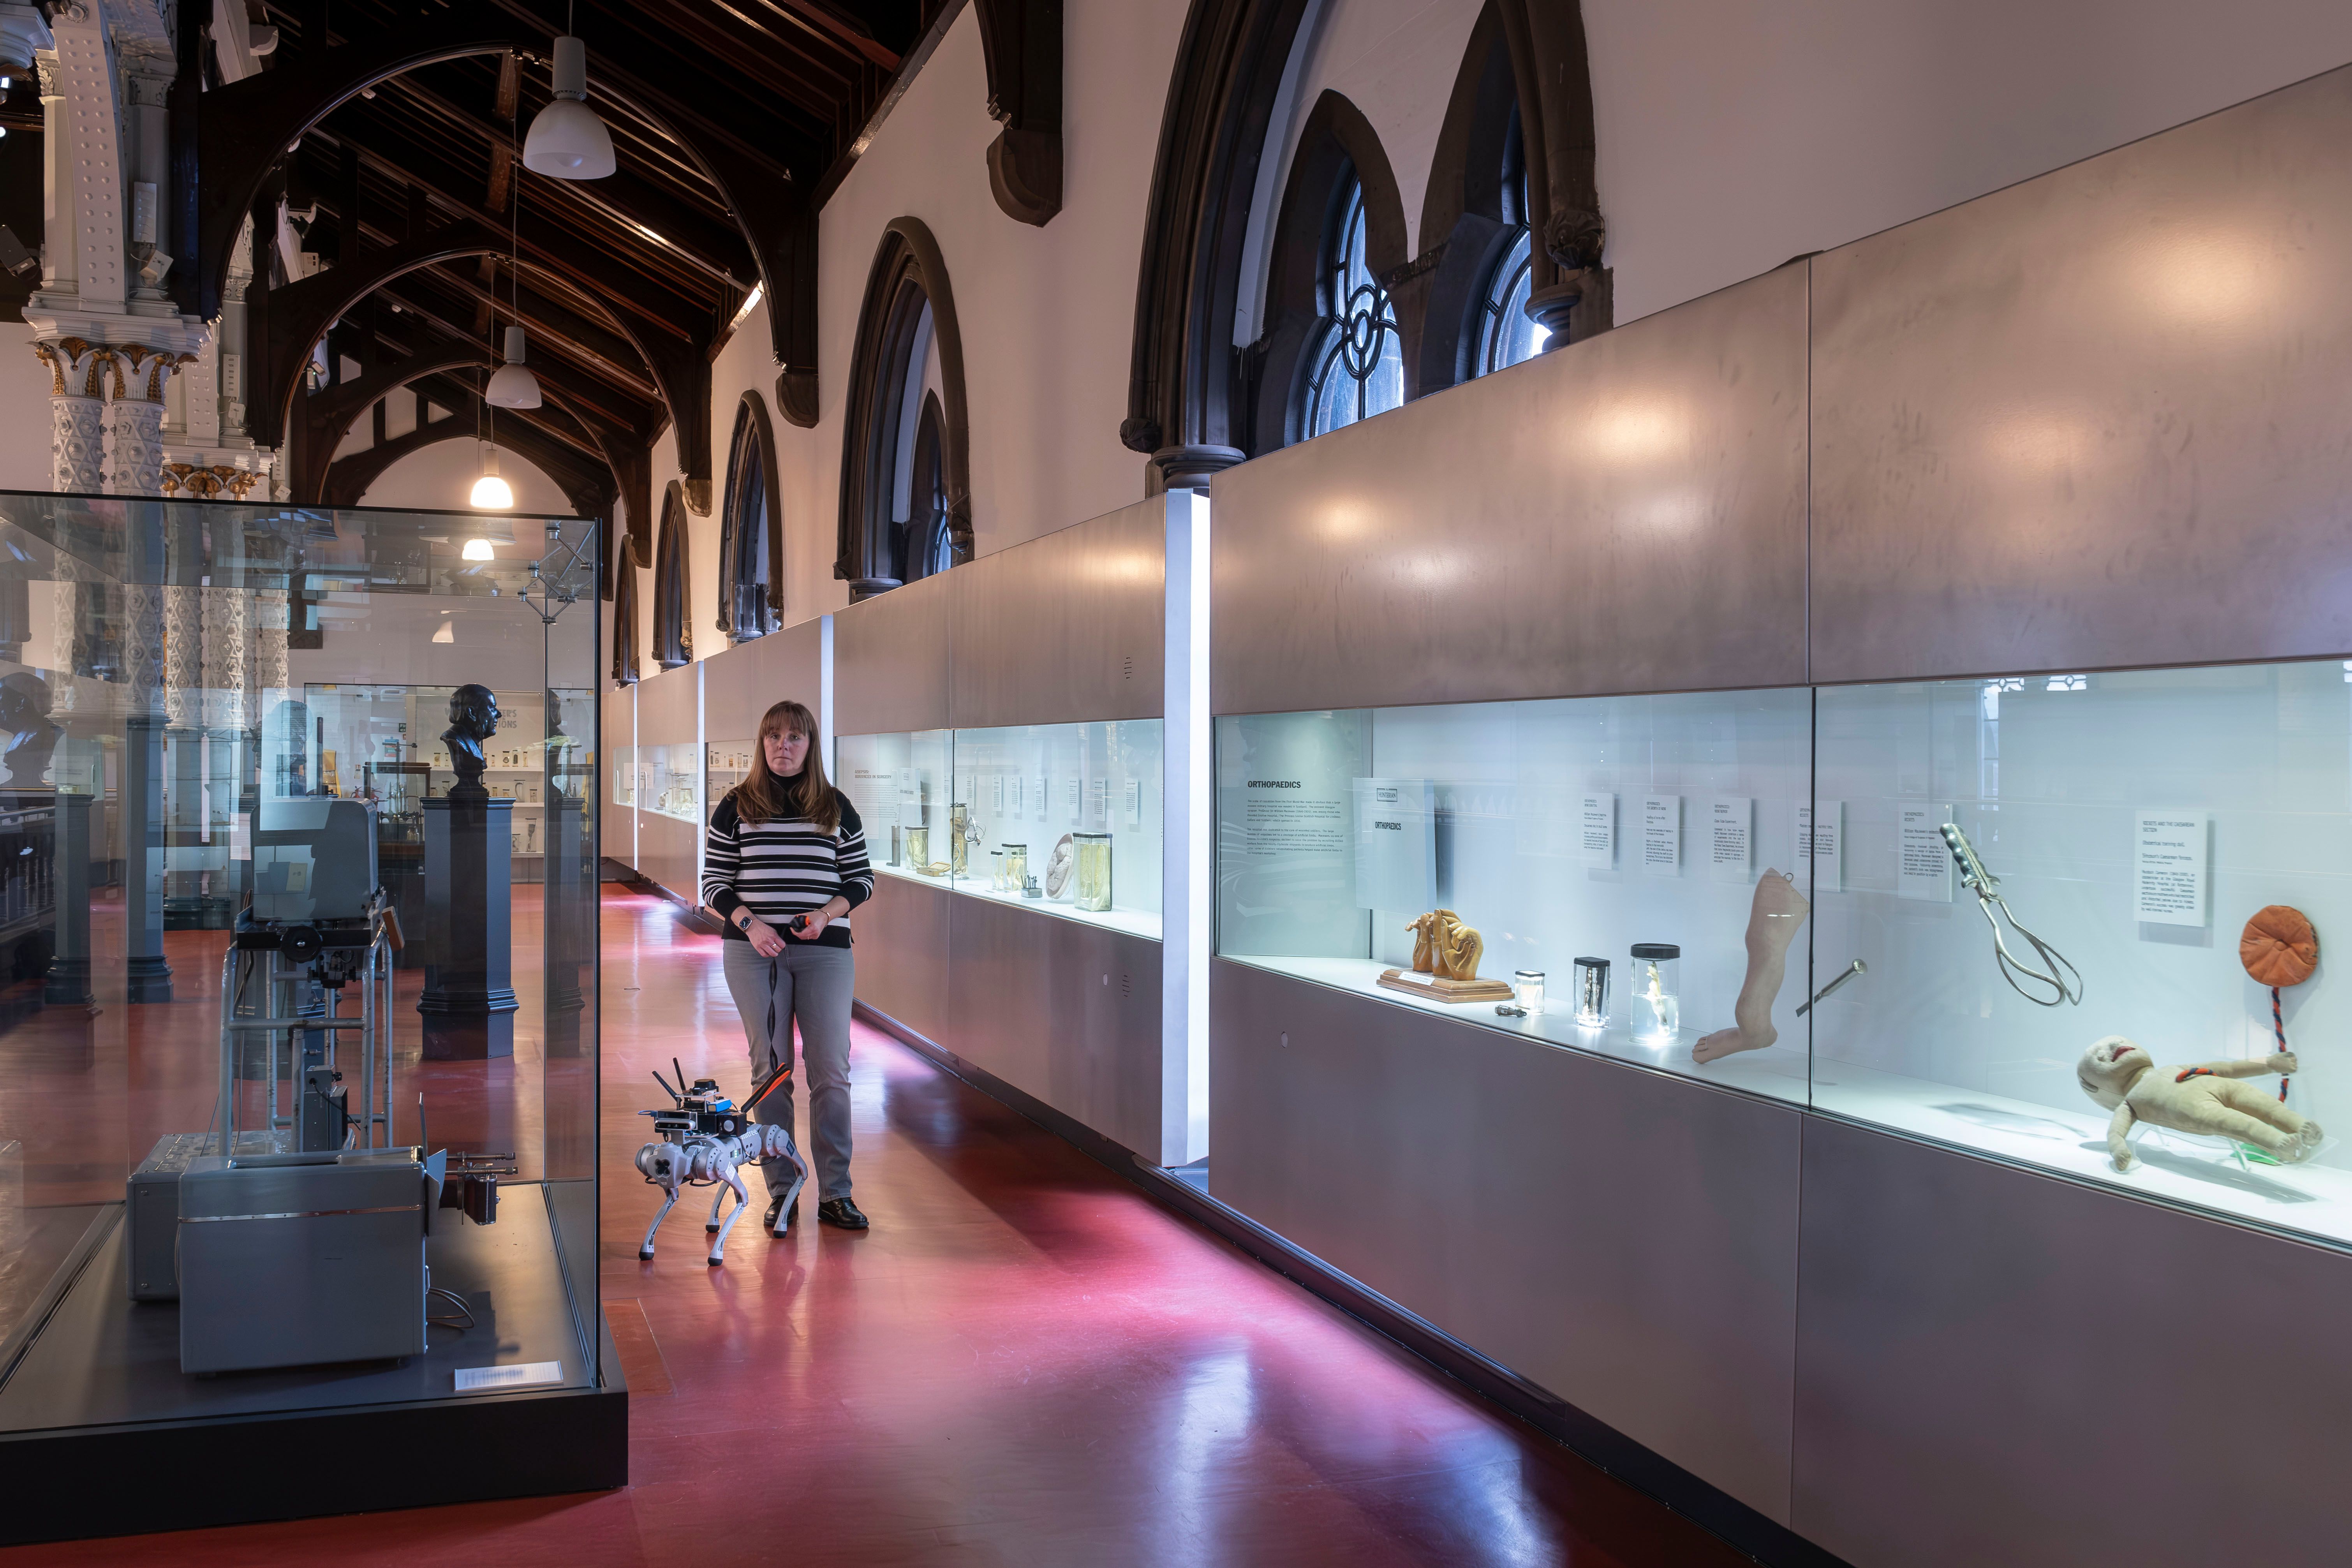 Volunteers used the robot guide dog to get around the Hunterian in Glasgow. Photo: University of Glasgow.